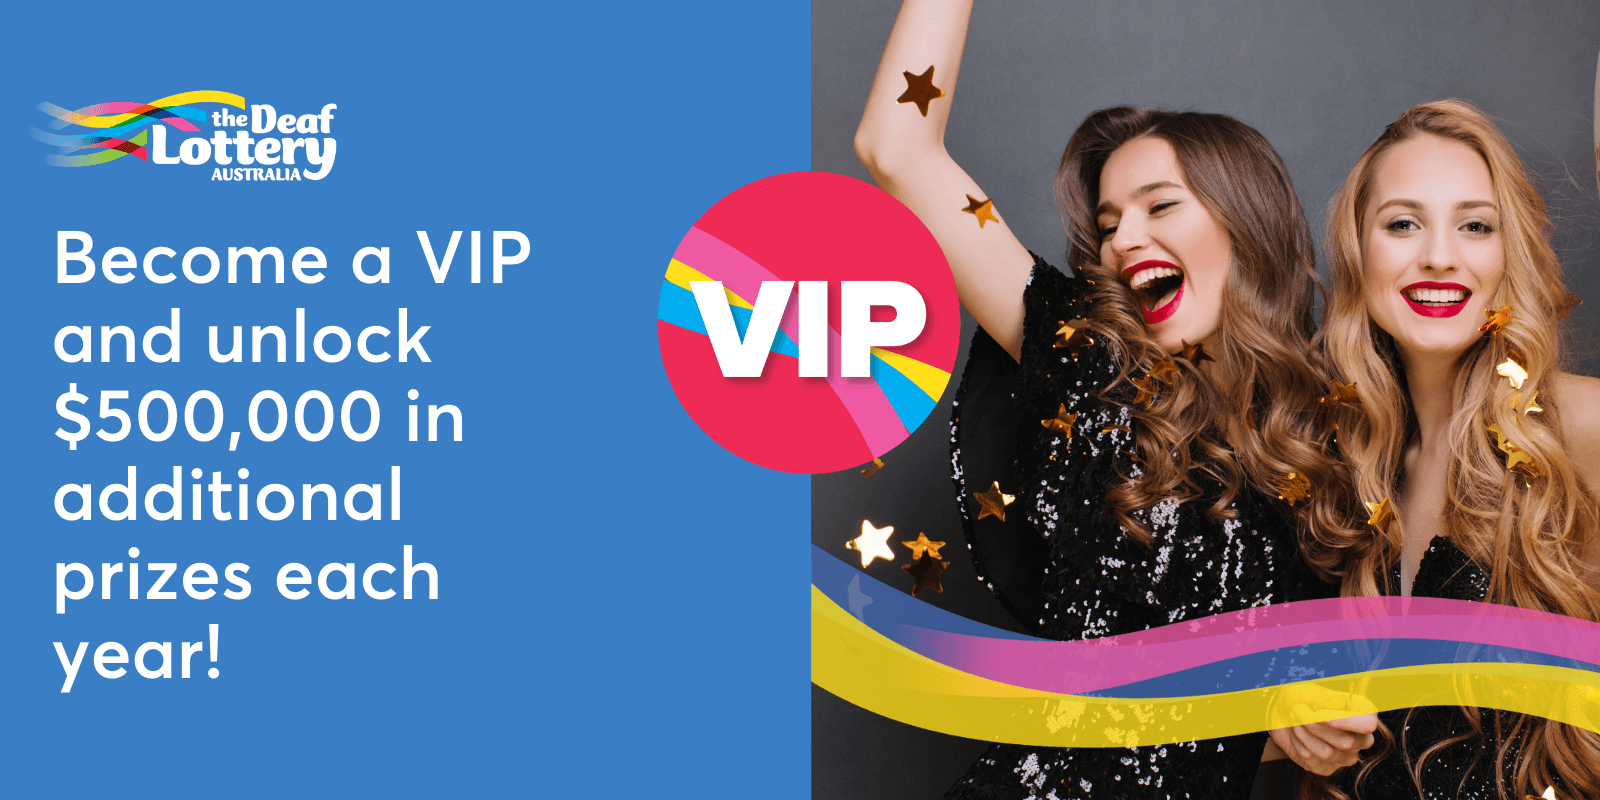 Text: Become a VIP and unlock $500,000 in additional prizes each year!